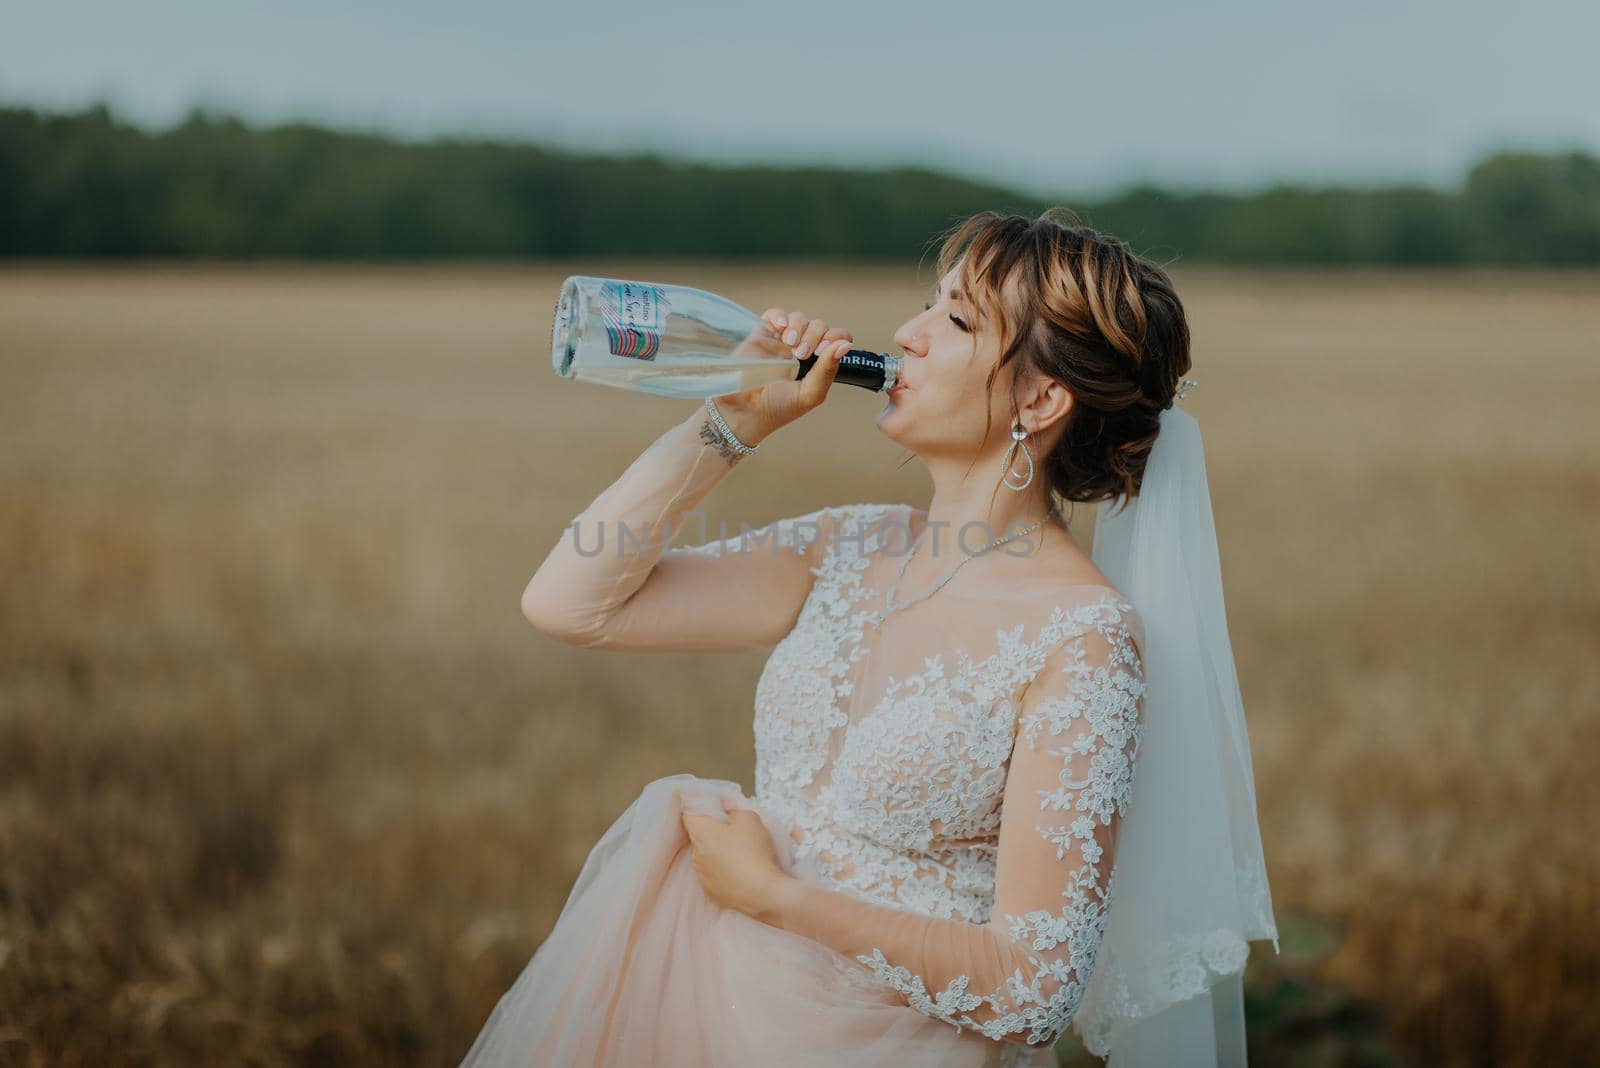 Girl in wedding dress and white veil drinking champagne from bottle